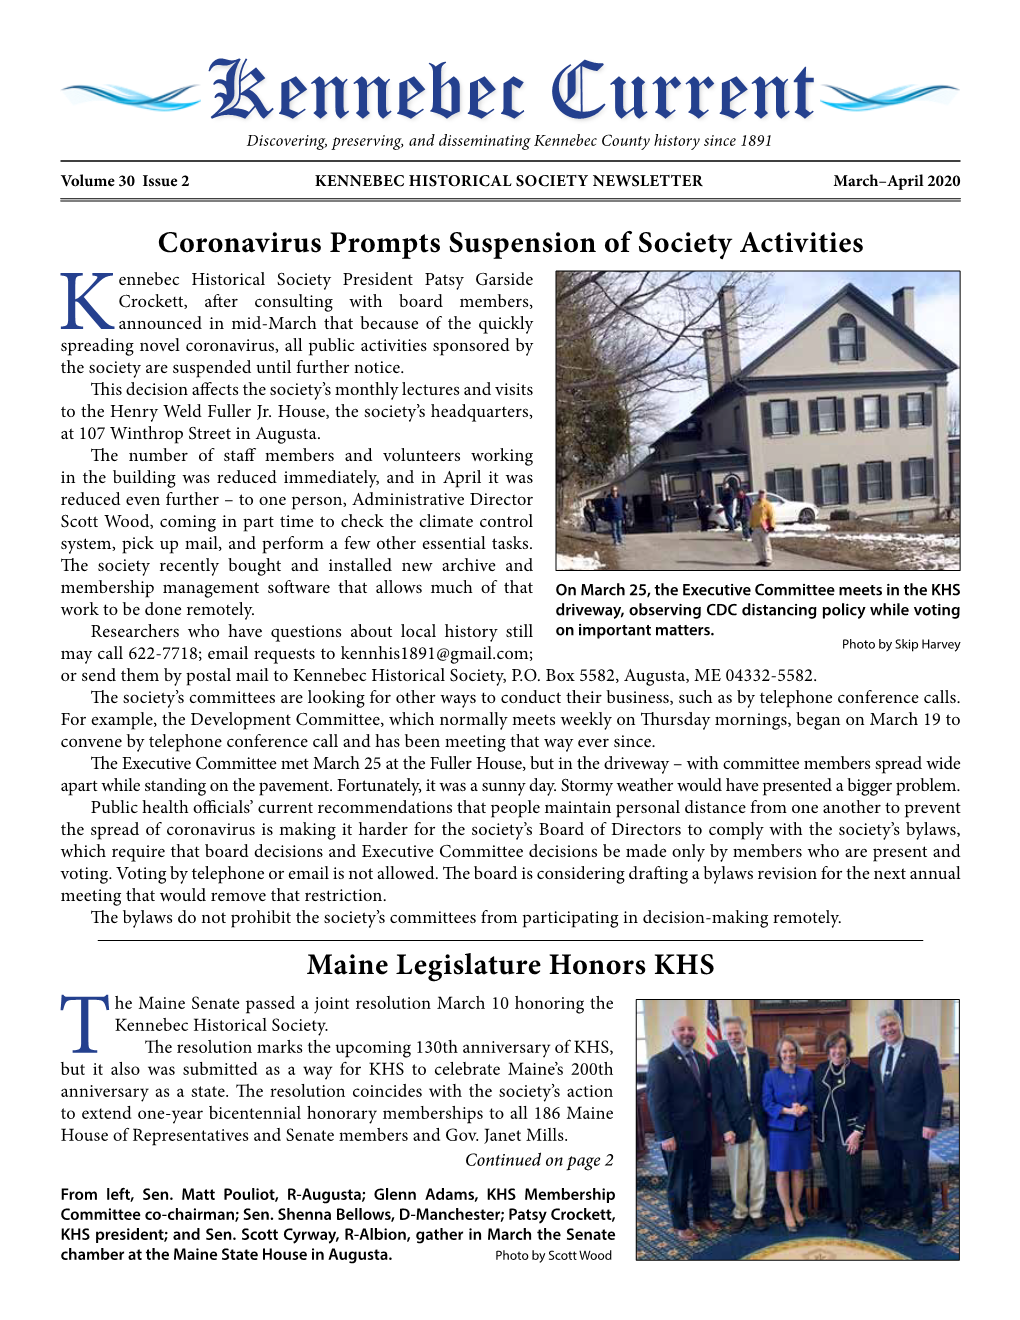 Kennebec Current Discovering, Preserving, and Disseminating Kennebec County History Since 1891